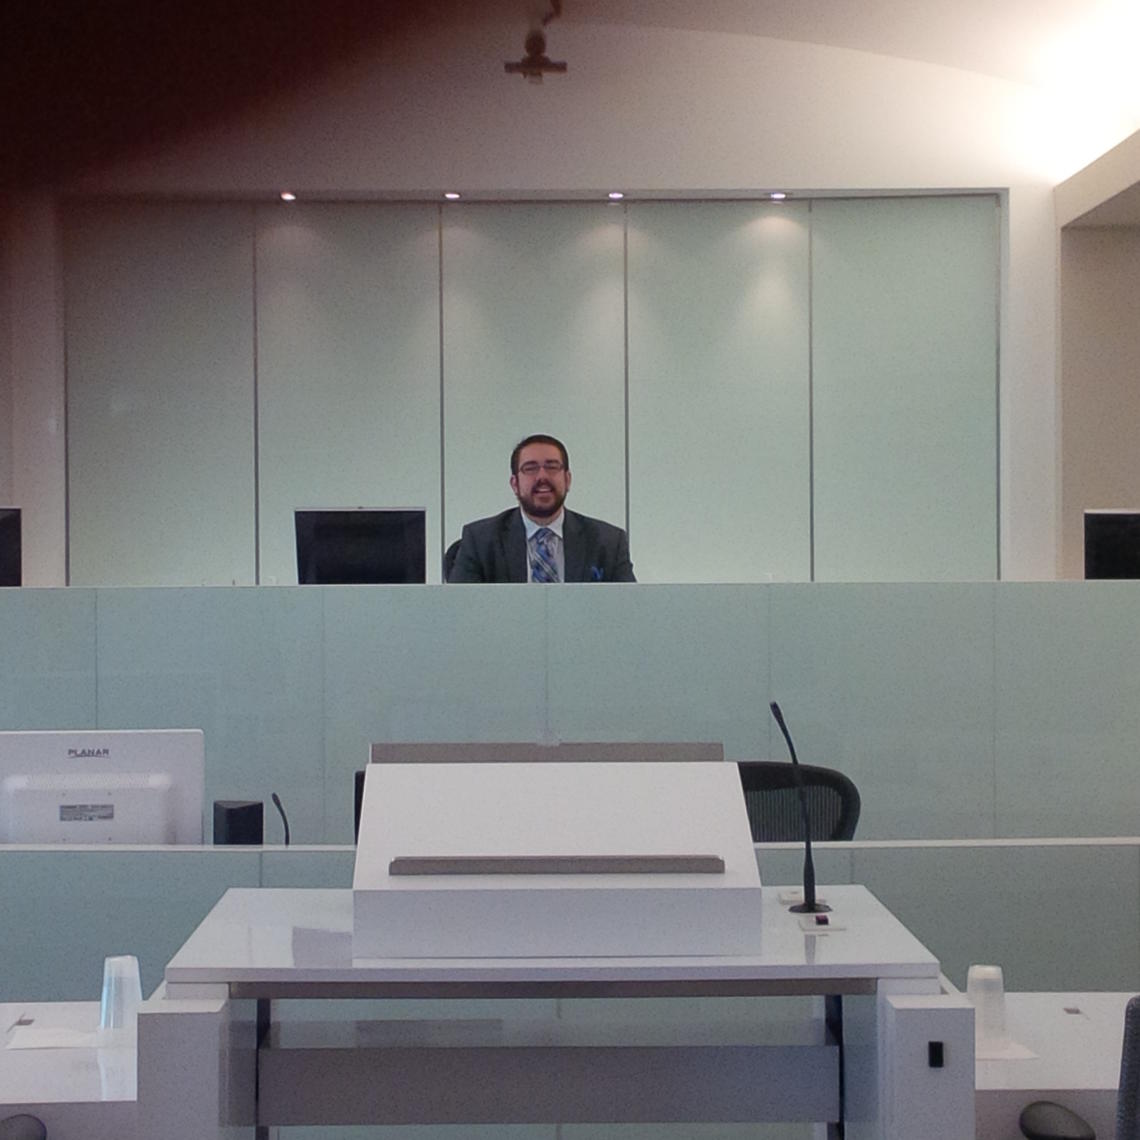 Alastair at work at the Alberta Court of Appeal in Calgary.